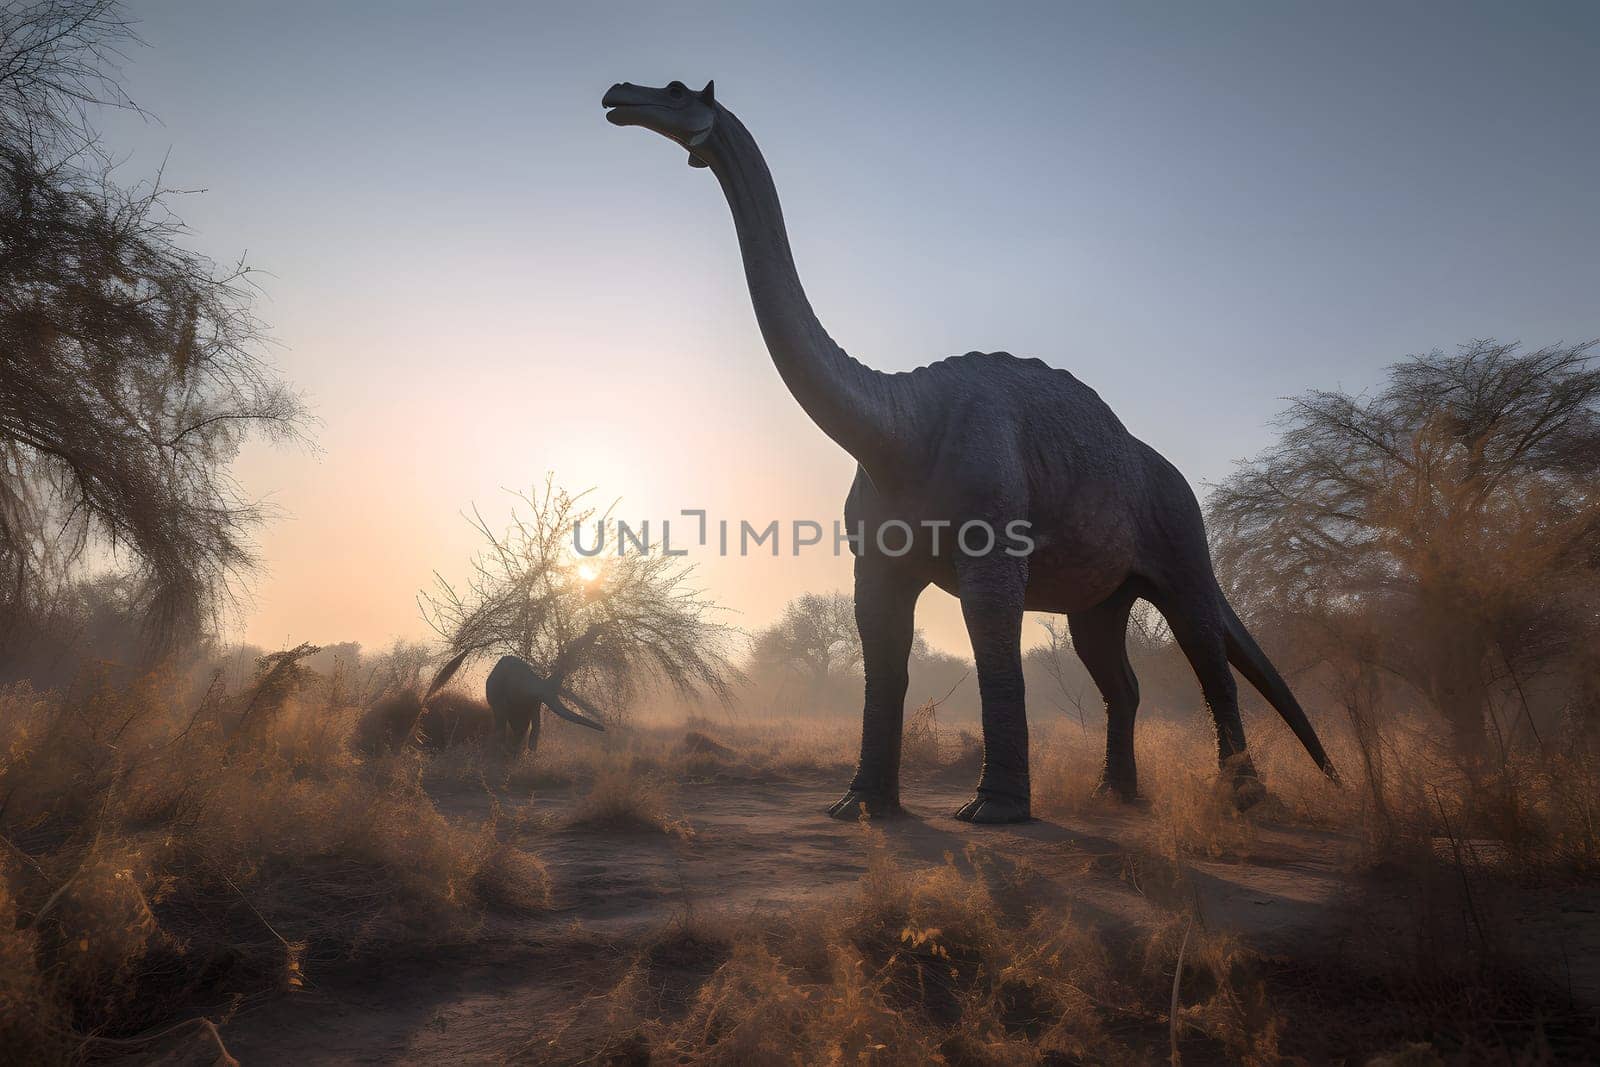 Brontosaurus wide angle view full body portrait at summer day light, neural network generated photorealistic image by z1b